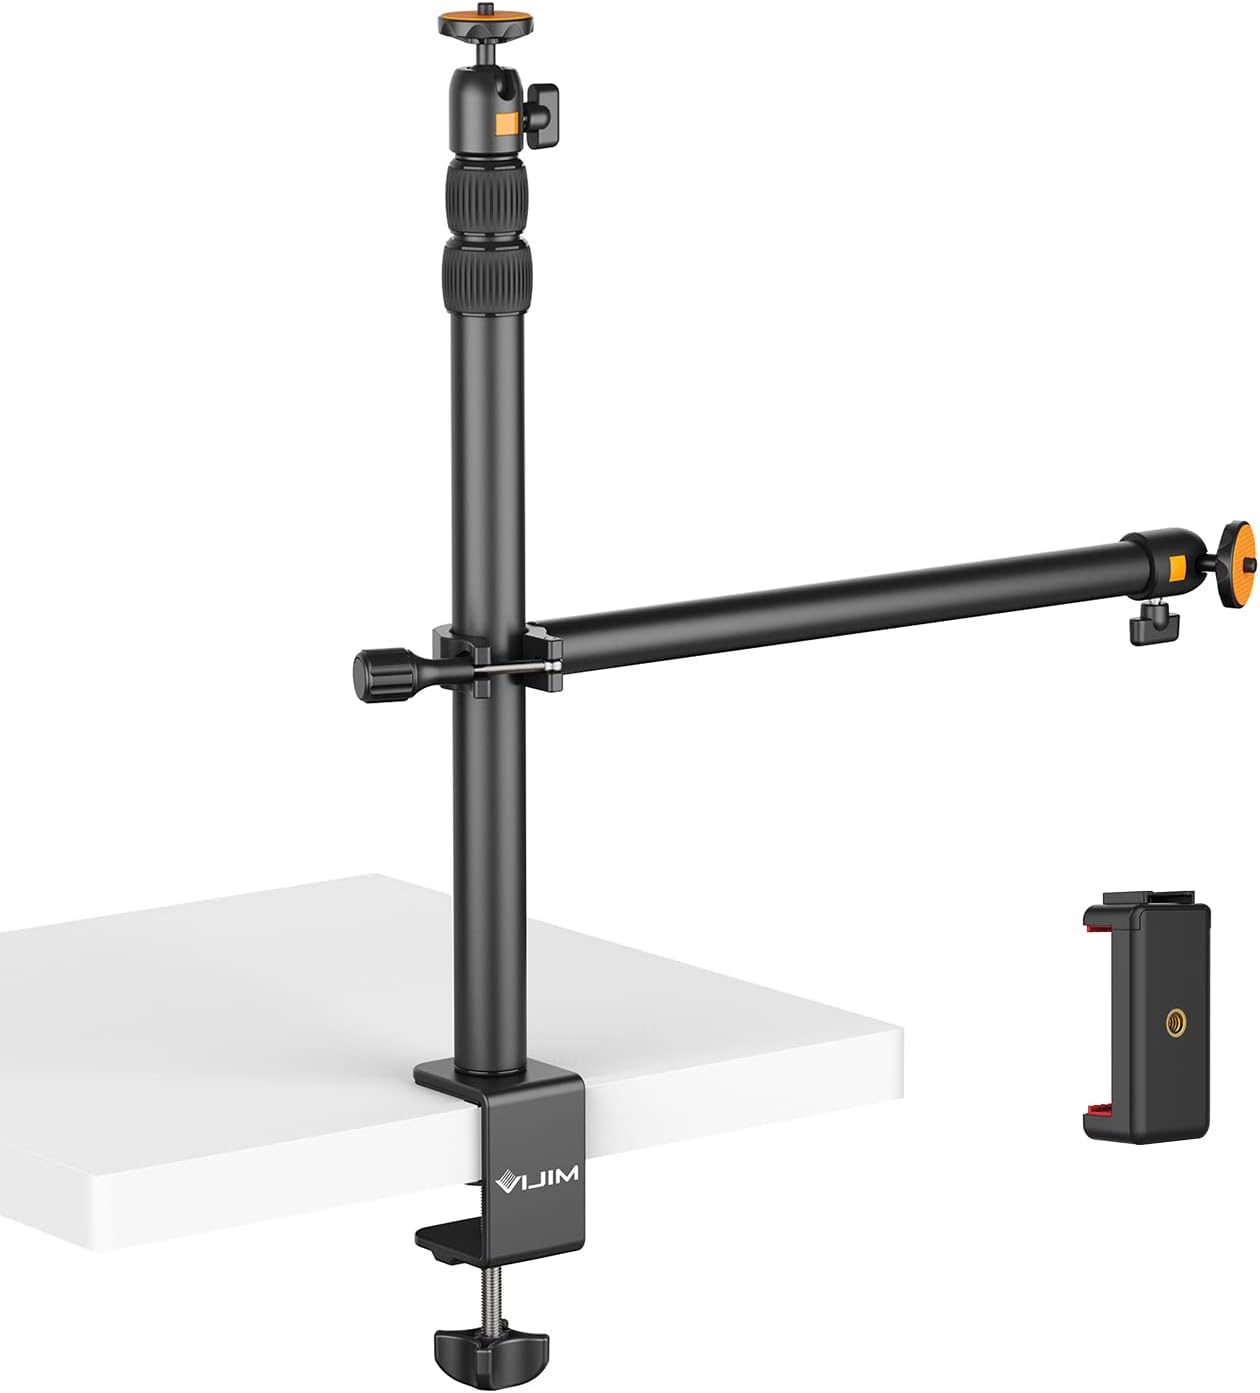 Camera Table Mount Stand with Flexible Arm